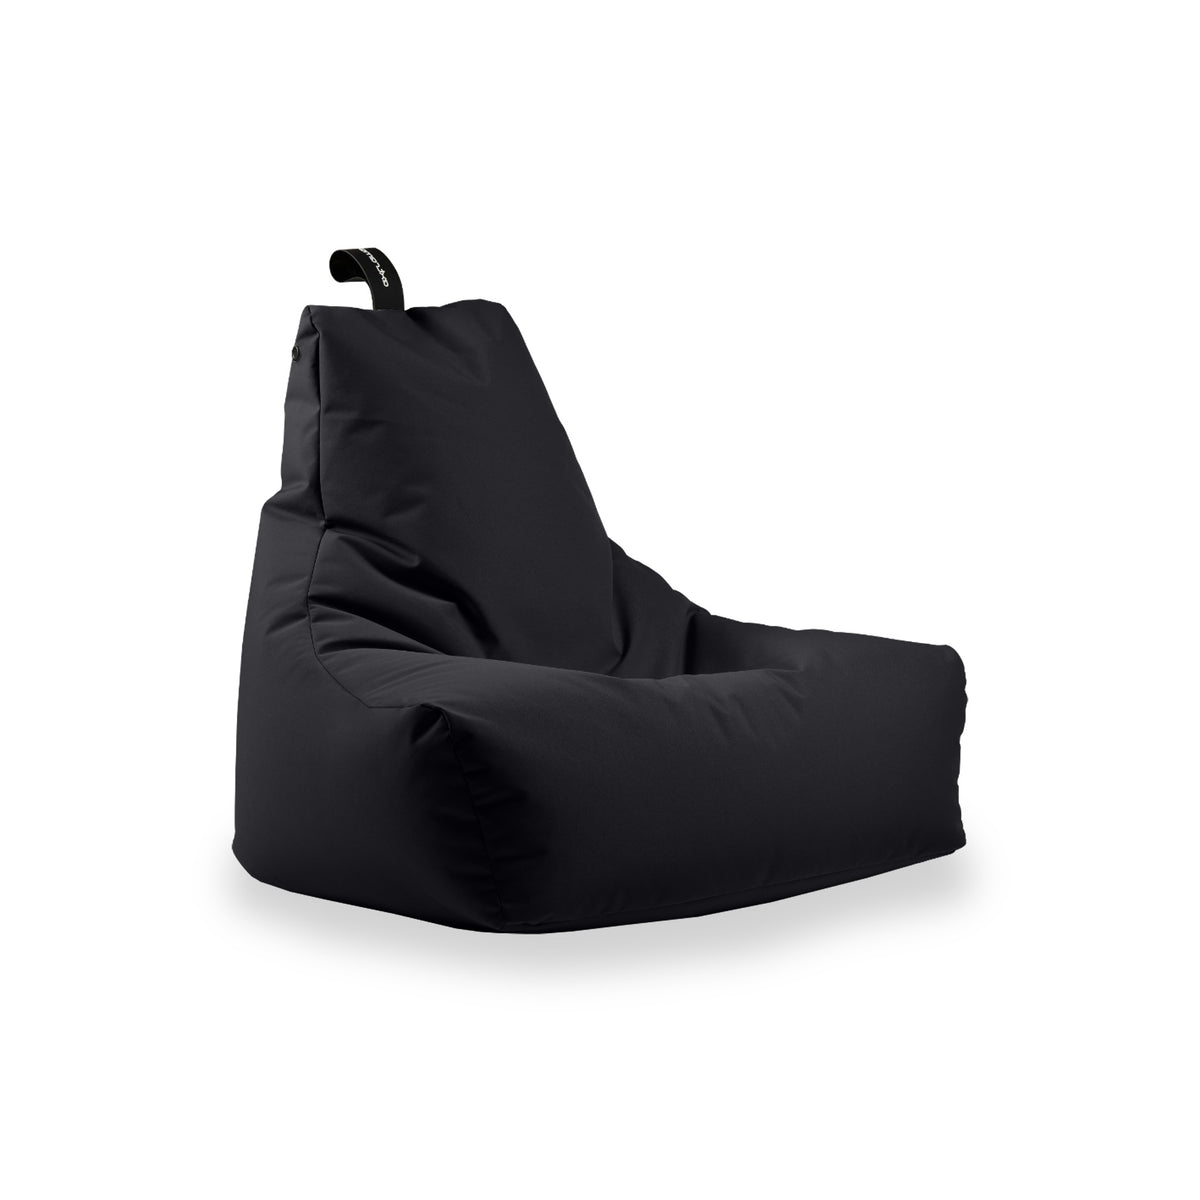 Mighty B Beanbag in Black from Roseland Furniture